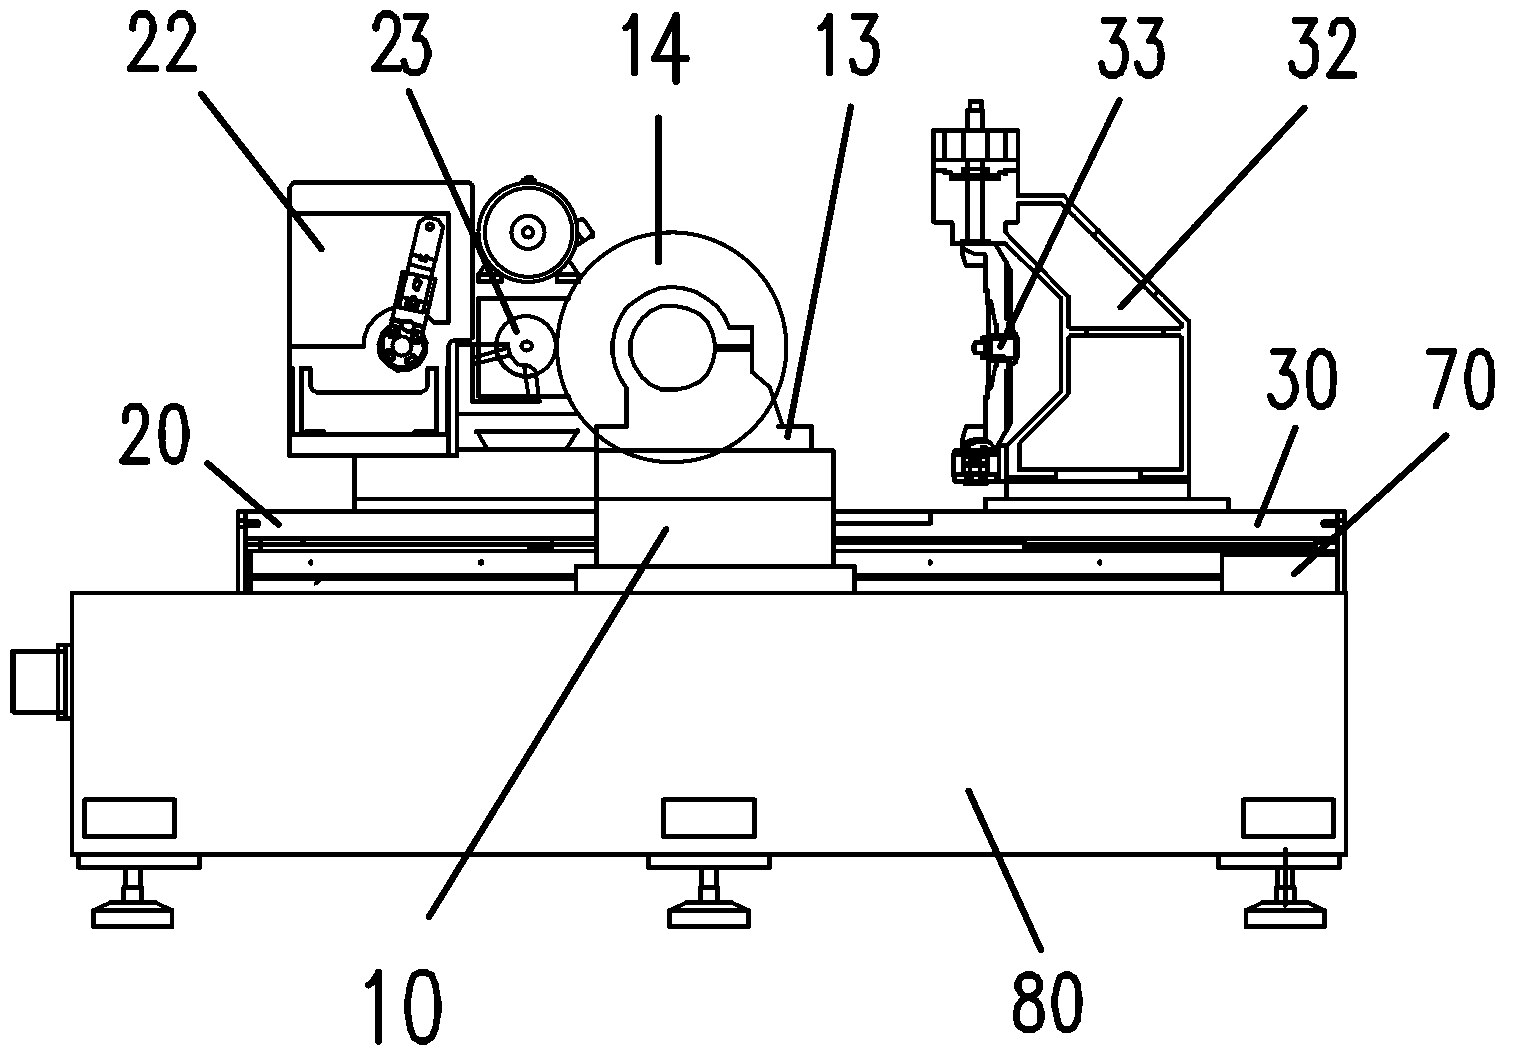 Drag plate structure of numerical control external cylindrical grinding machine